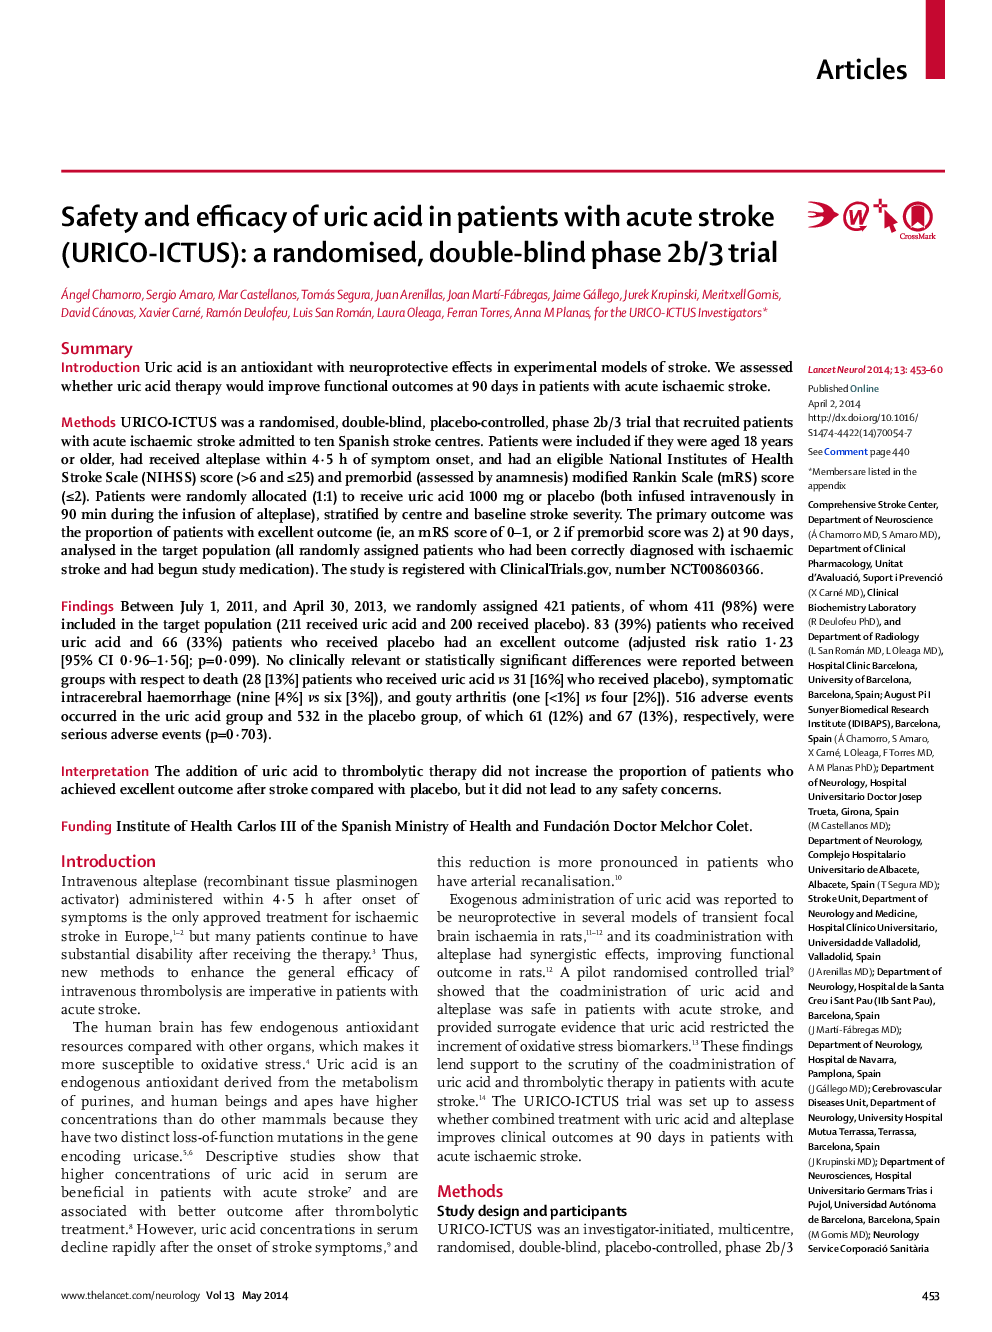 Safety and efficacy of uric acid in patients with acute stroke (URICO-ICTUS): a randomised, double-blind phase 2b/3 trial